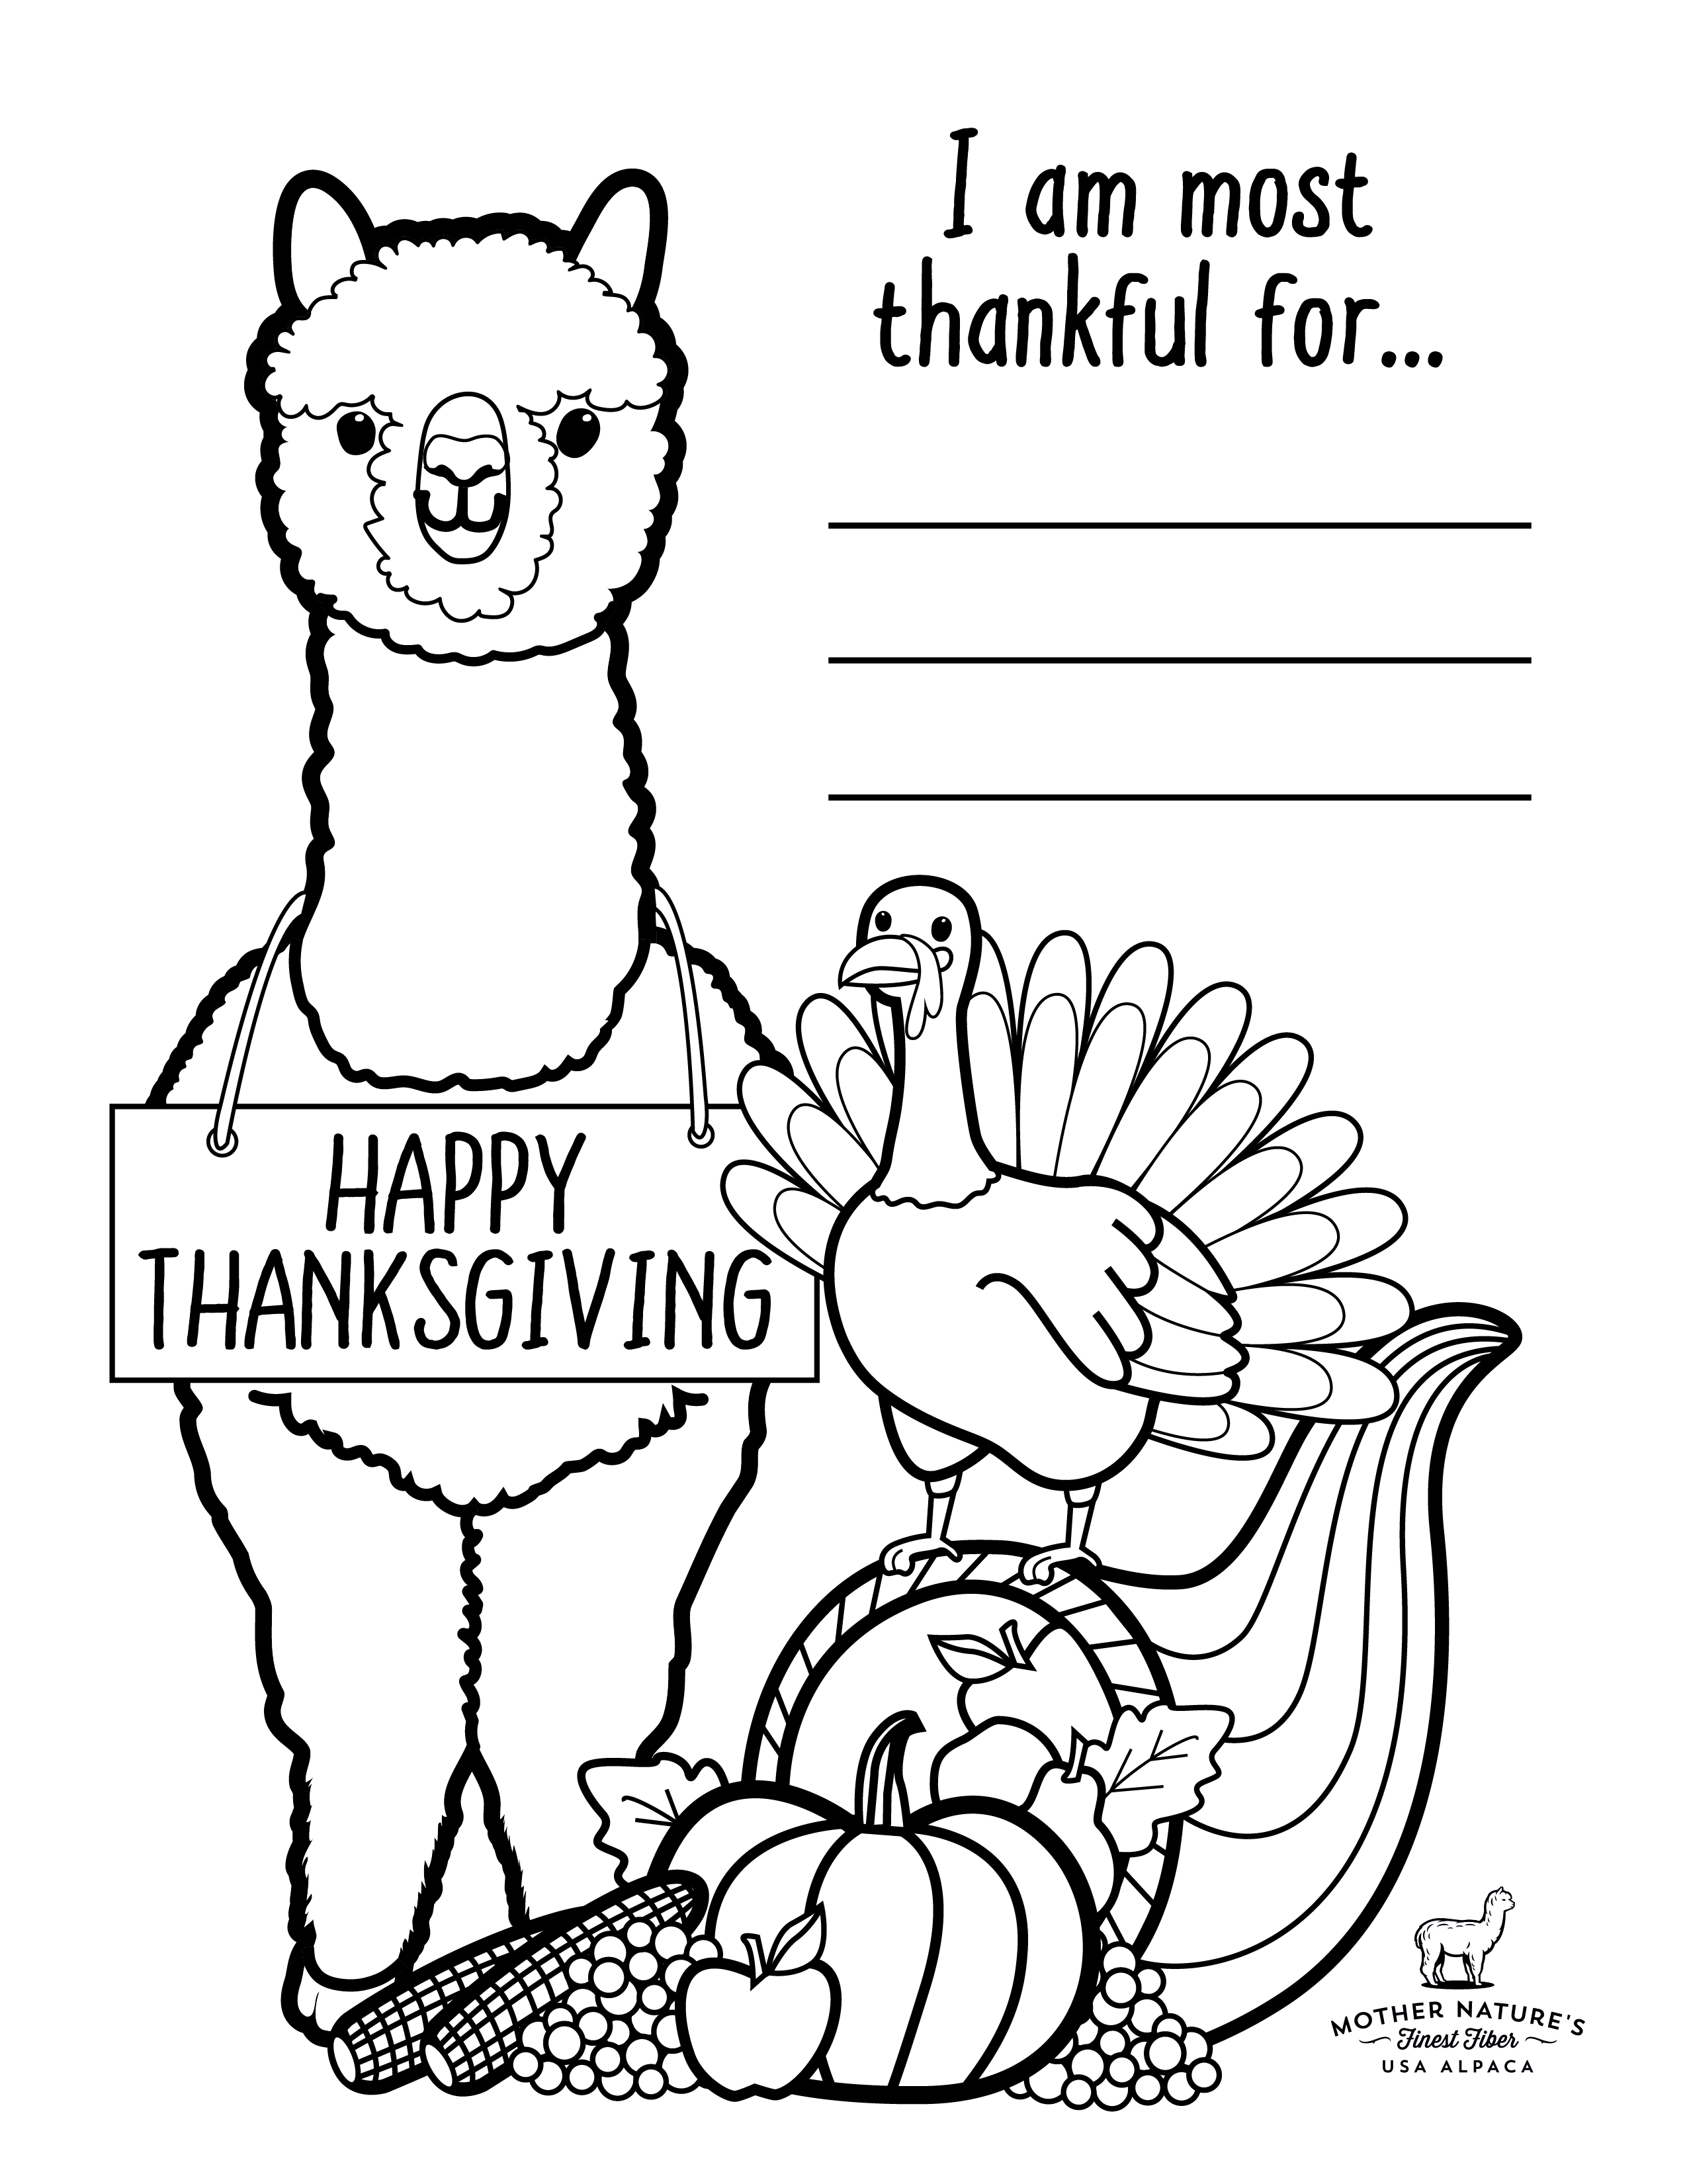 NEW Downloadable Content Thanksgiving Coloring Page